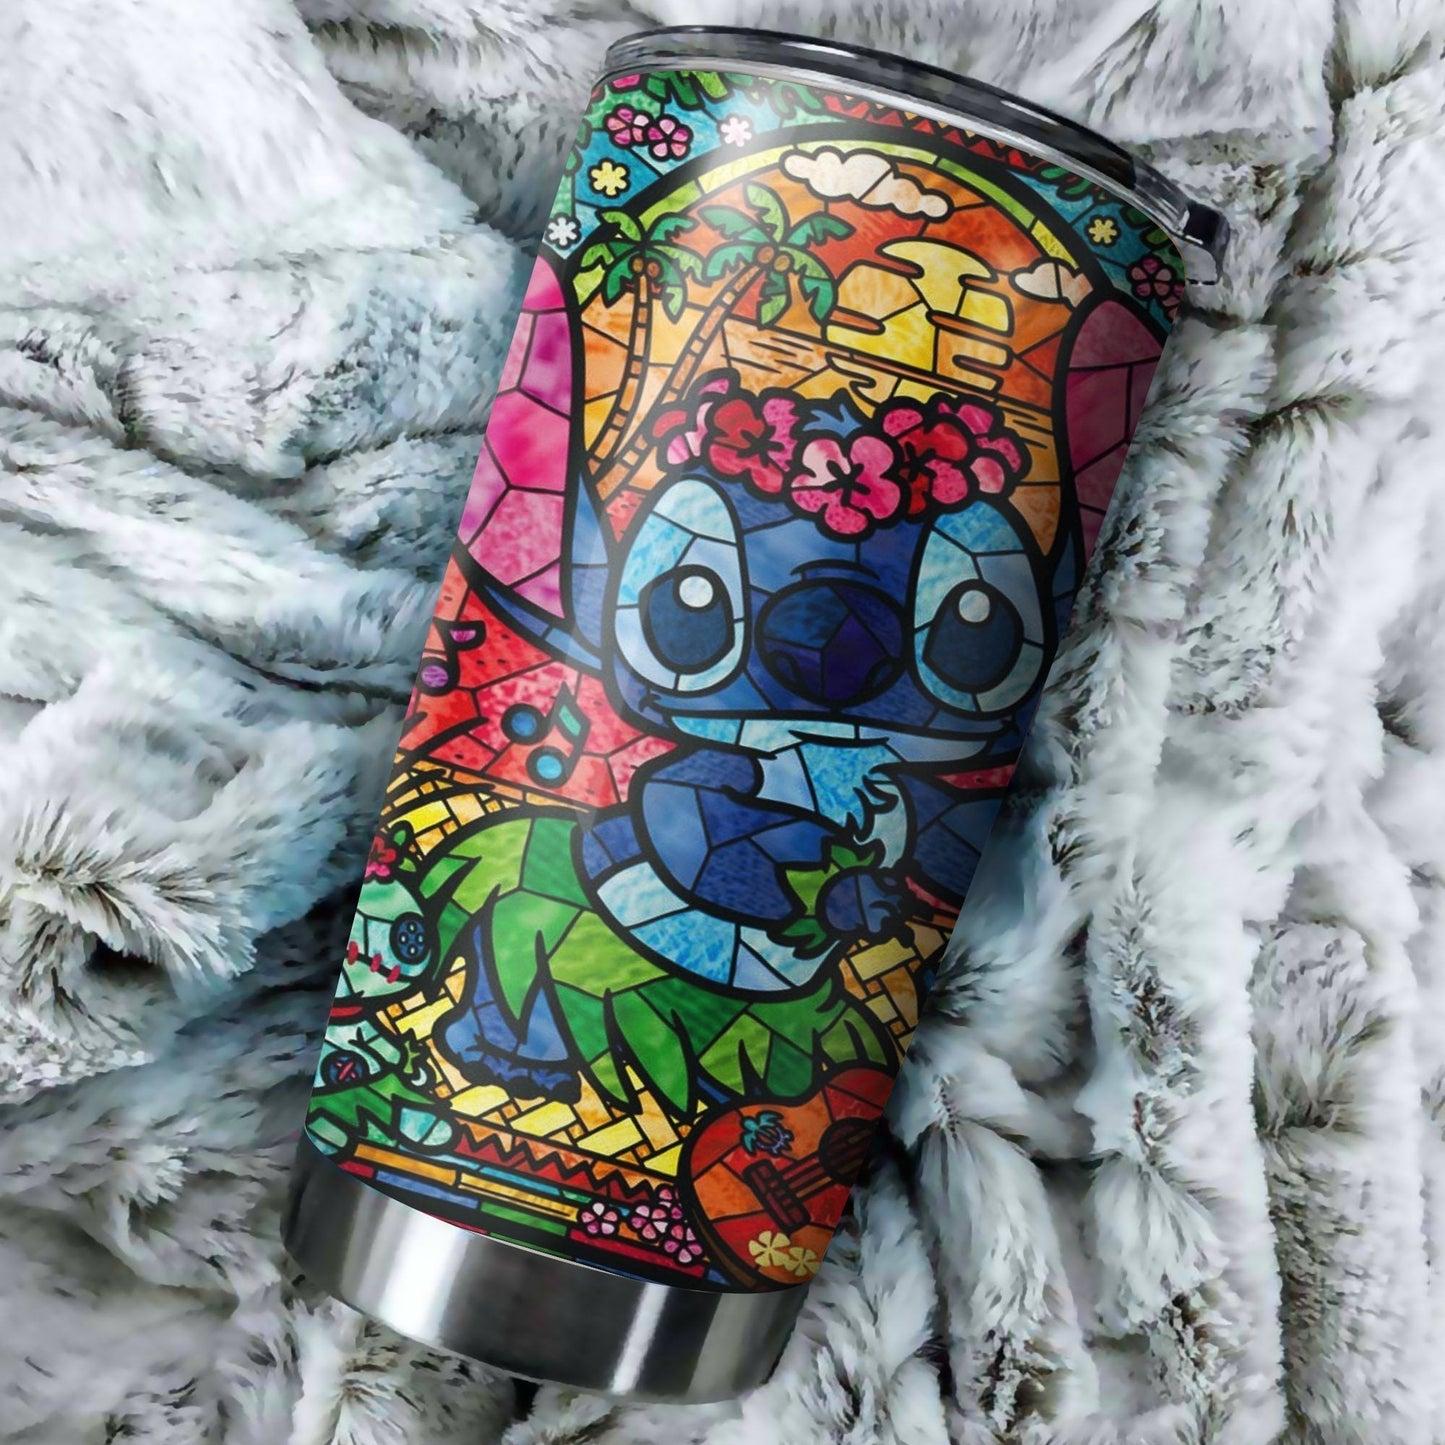 DN Tumbler 20 Oz Stitch Tumbler Stitch Stained Glass Colorful Tumbler Cup 20 Oz